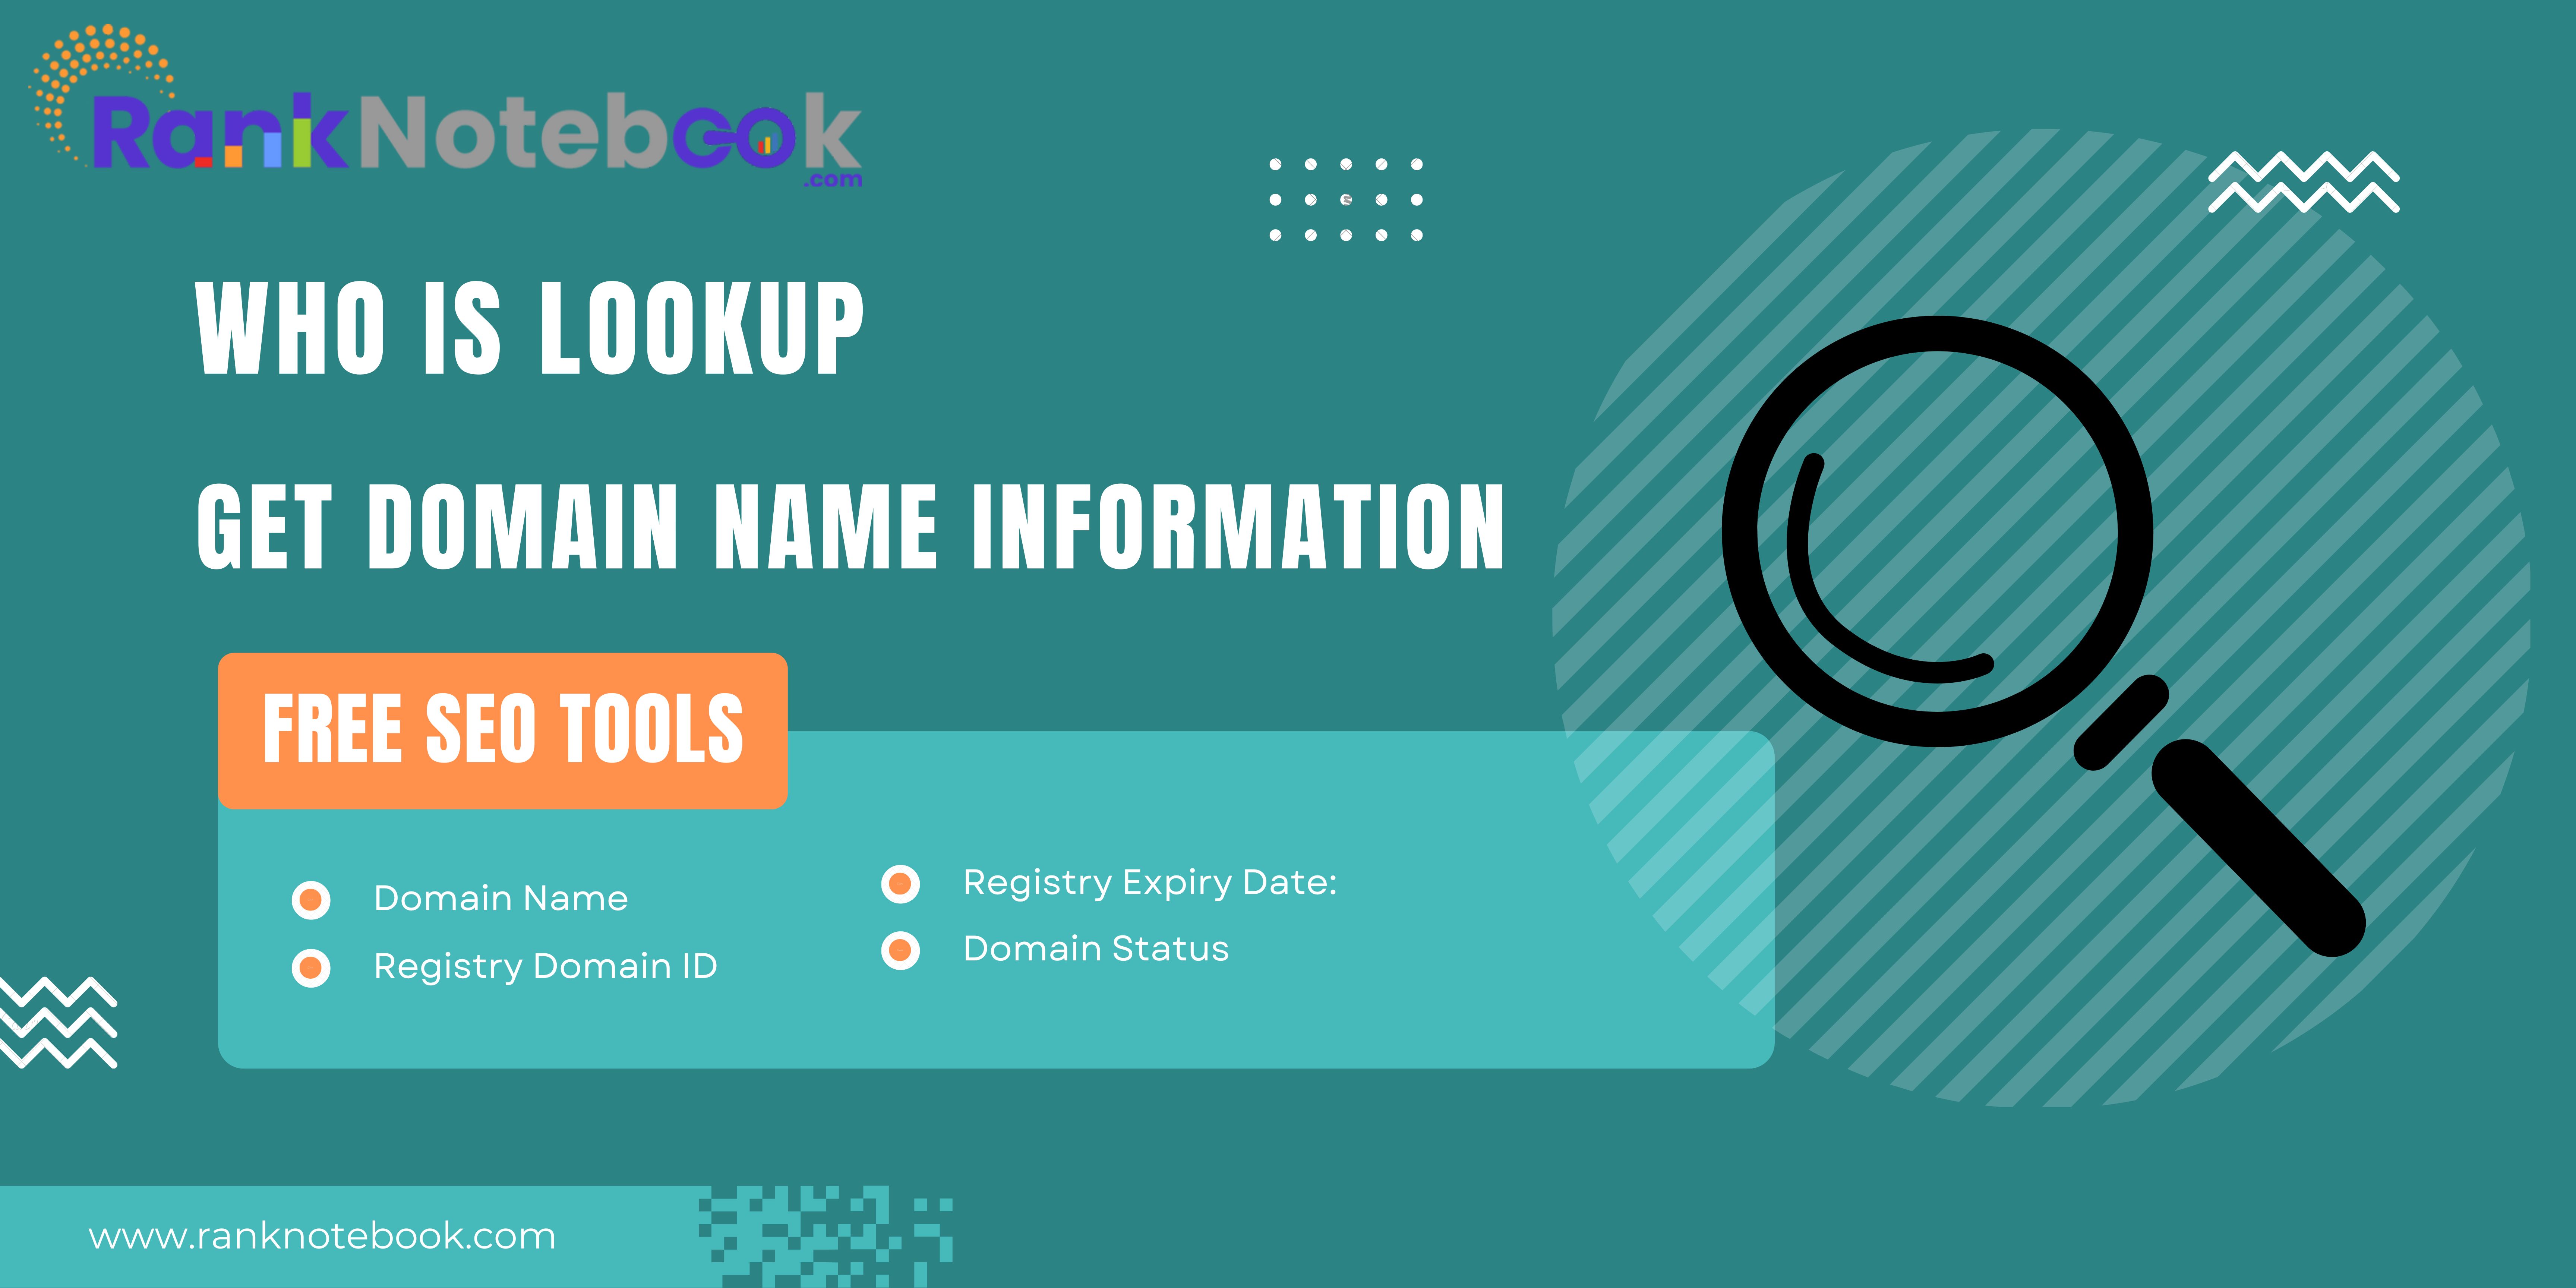 Online Free Who is Lookup Tool - Rank Notebook